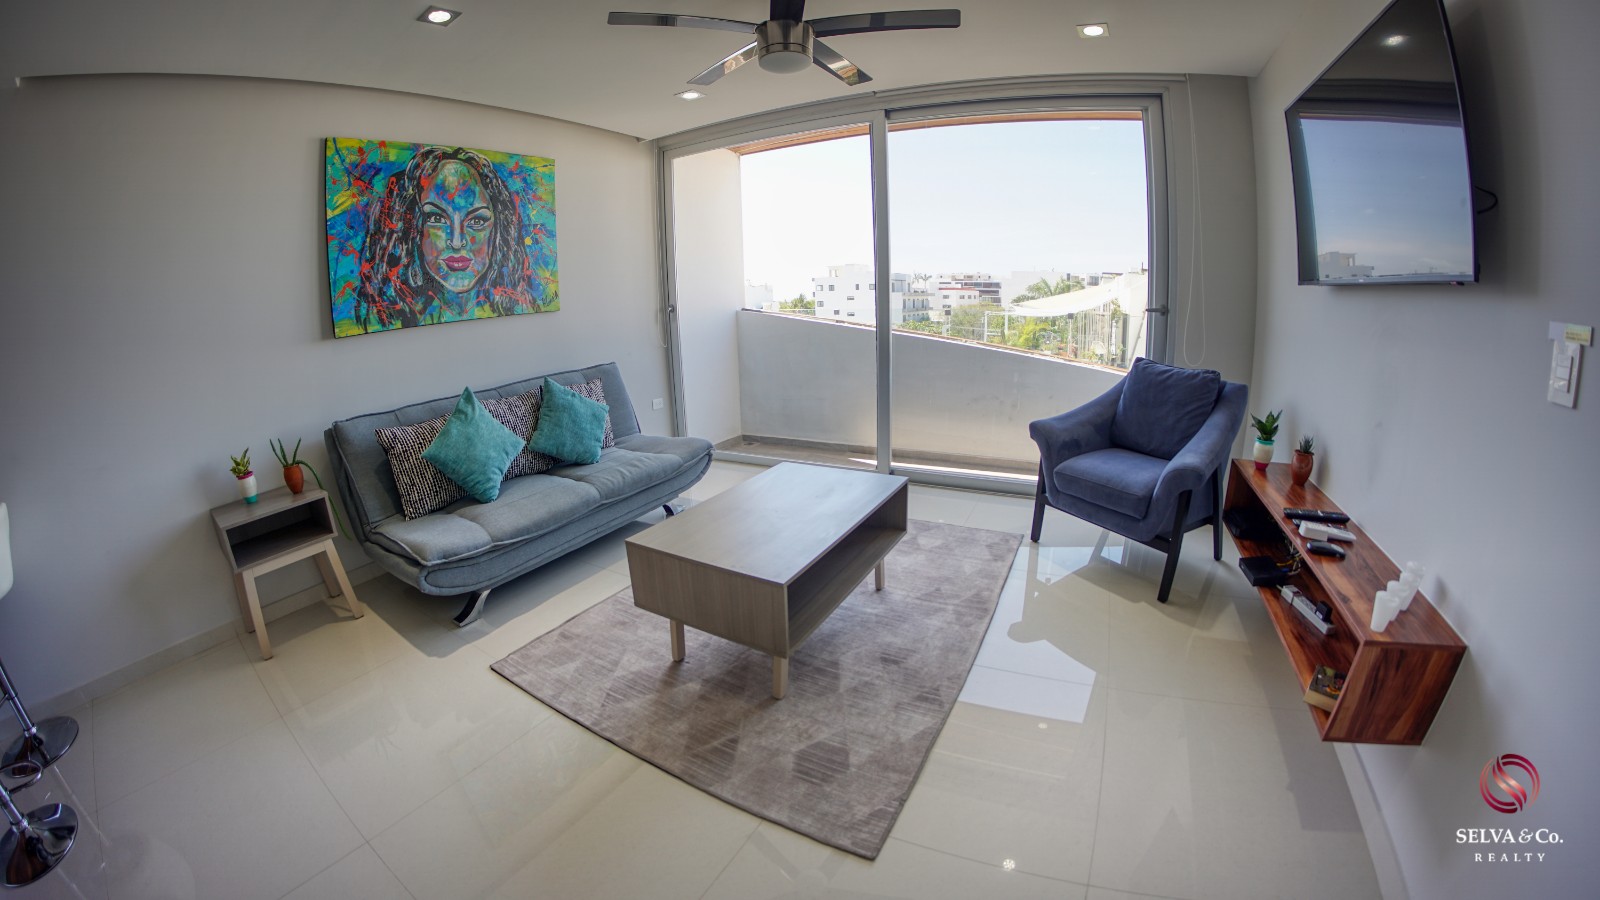 Condo 5 minutes from the beach with jacuzzi, 2 pools, yoga area, gym, coworking, for sale Playa del Carmen